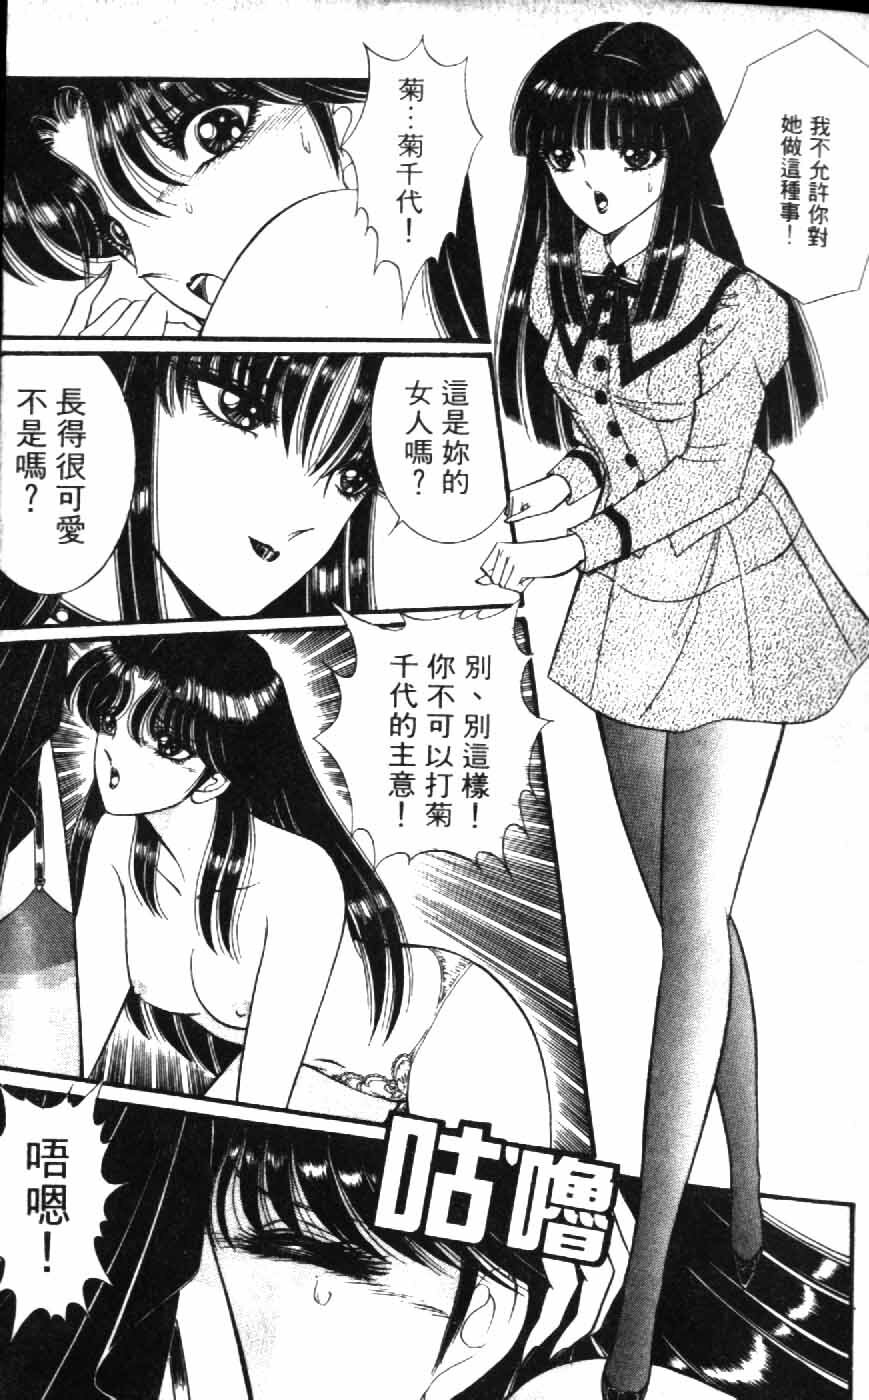 [Senno Knife] Ouma ga Horror Show 1 - Trans Sexual Special Show 1 | 顫慄博覽會 1 [Chinese] page 34 full